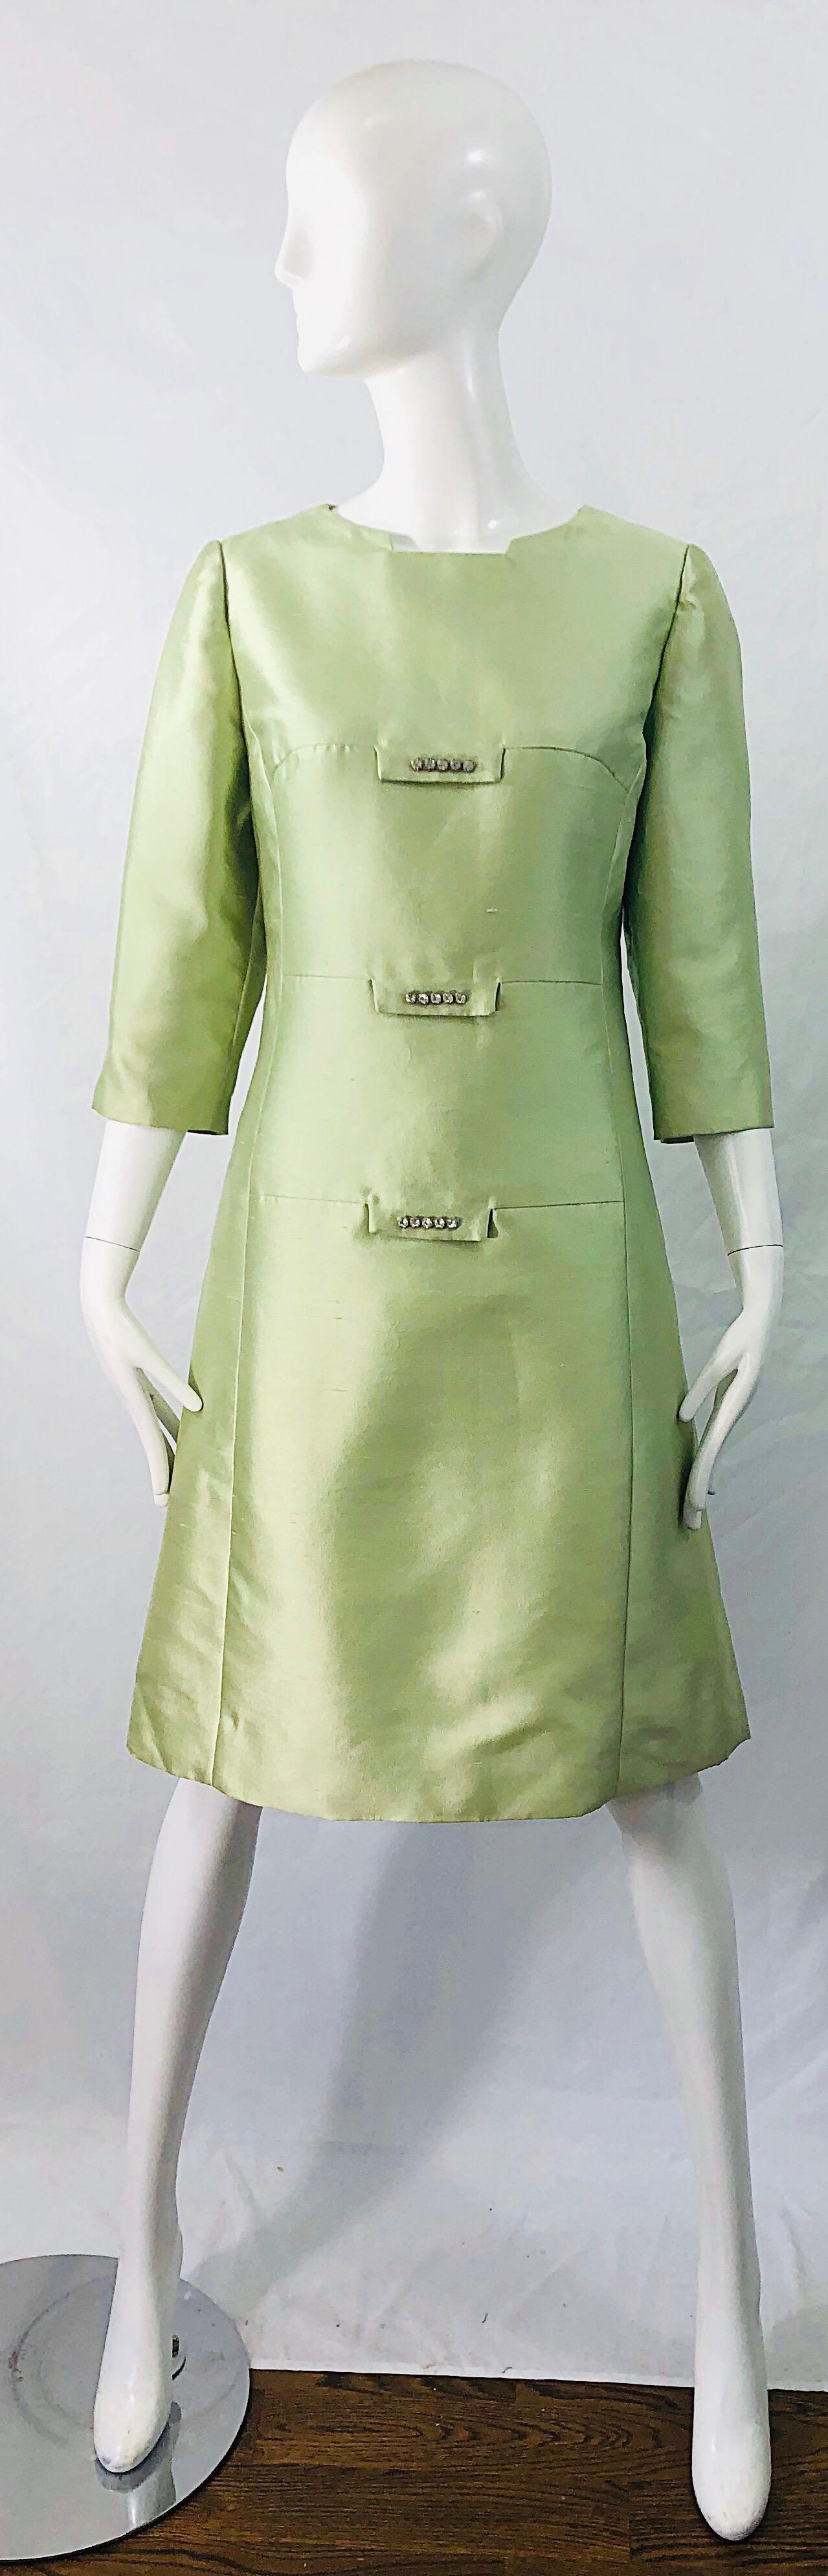 Chic 1960s mint green raw silk shantung rhinestone encrusted A-Line dress ! Features a architectural neckline. Tailored bodice with a forgiving A-Line skirt. Hidden zipper up the back with hook-and-eye closure. Fully lined. Perfect for any day or